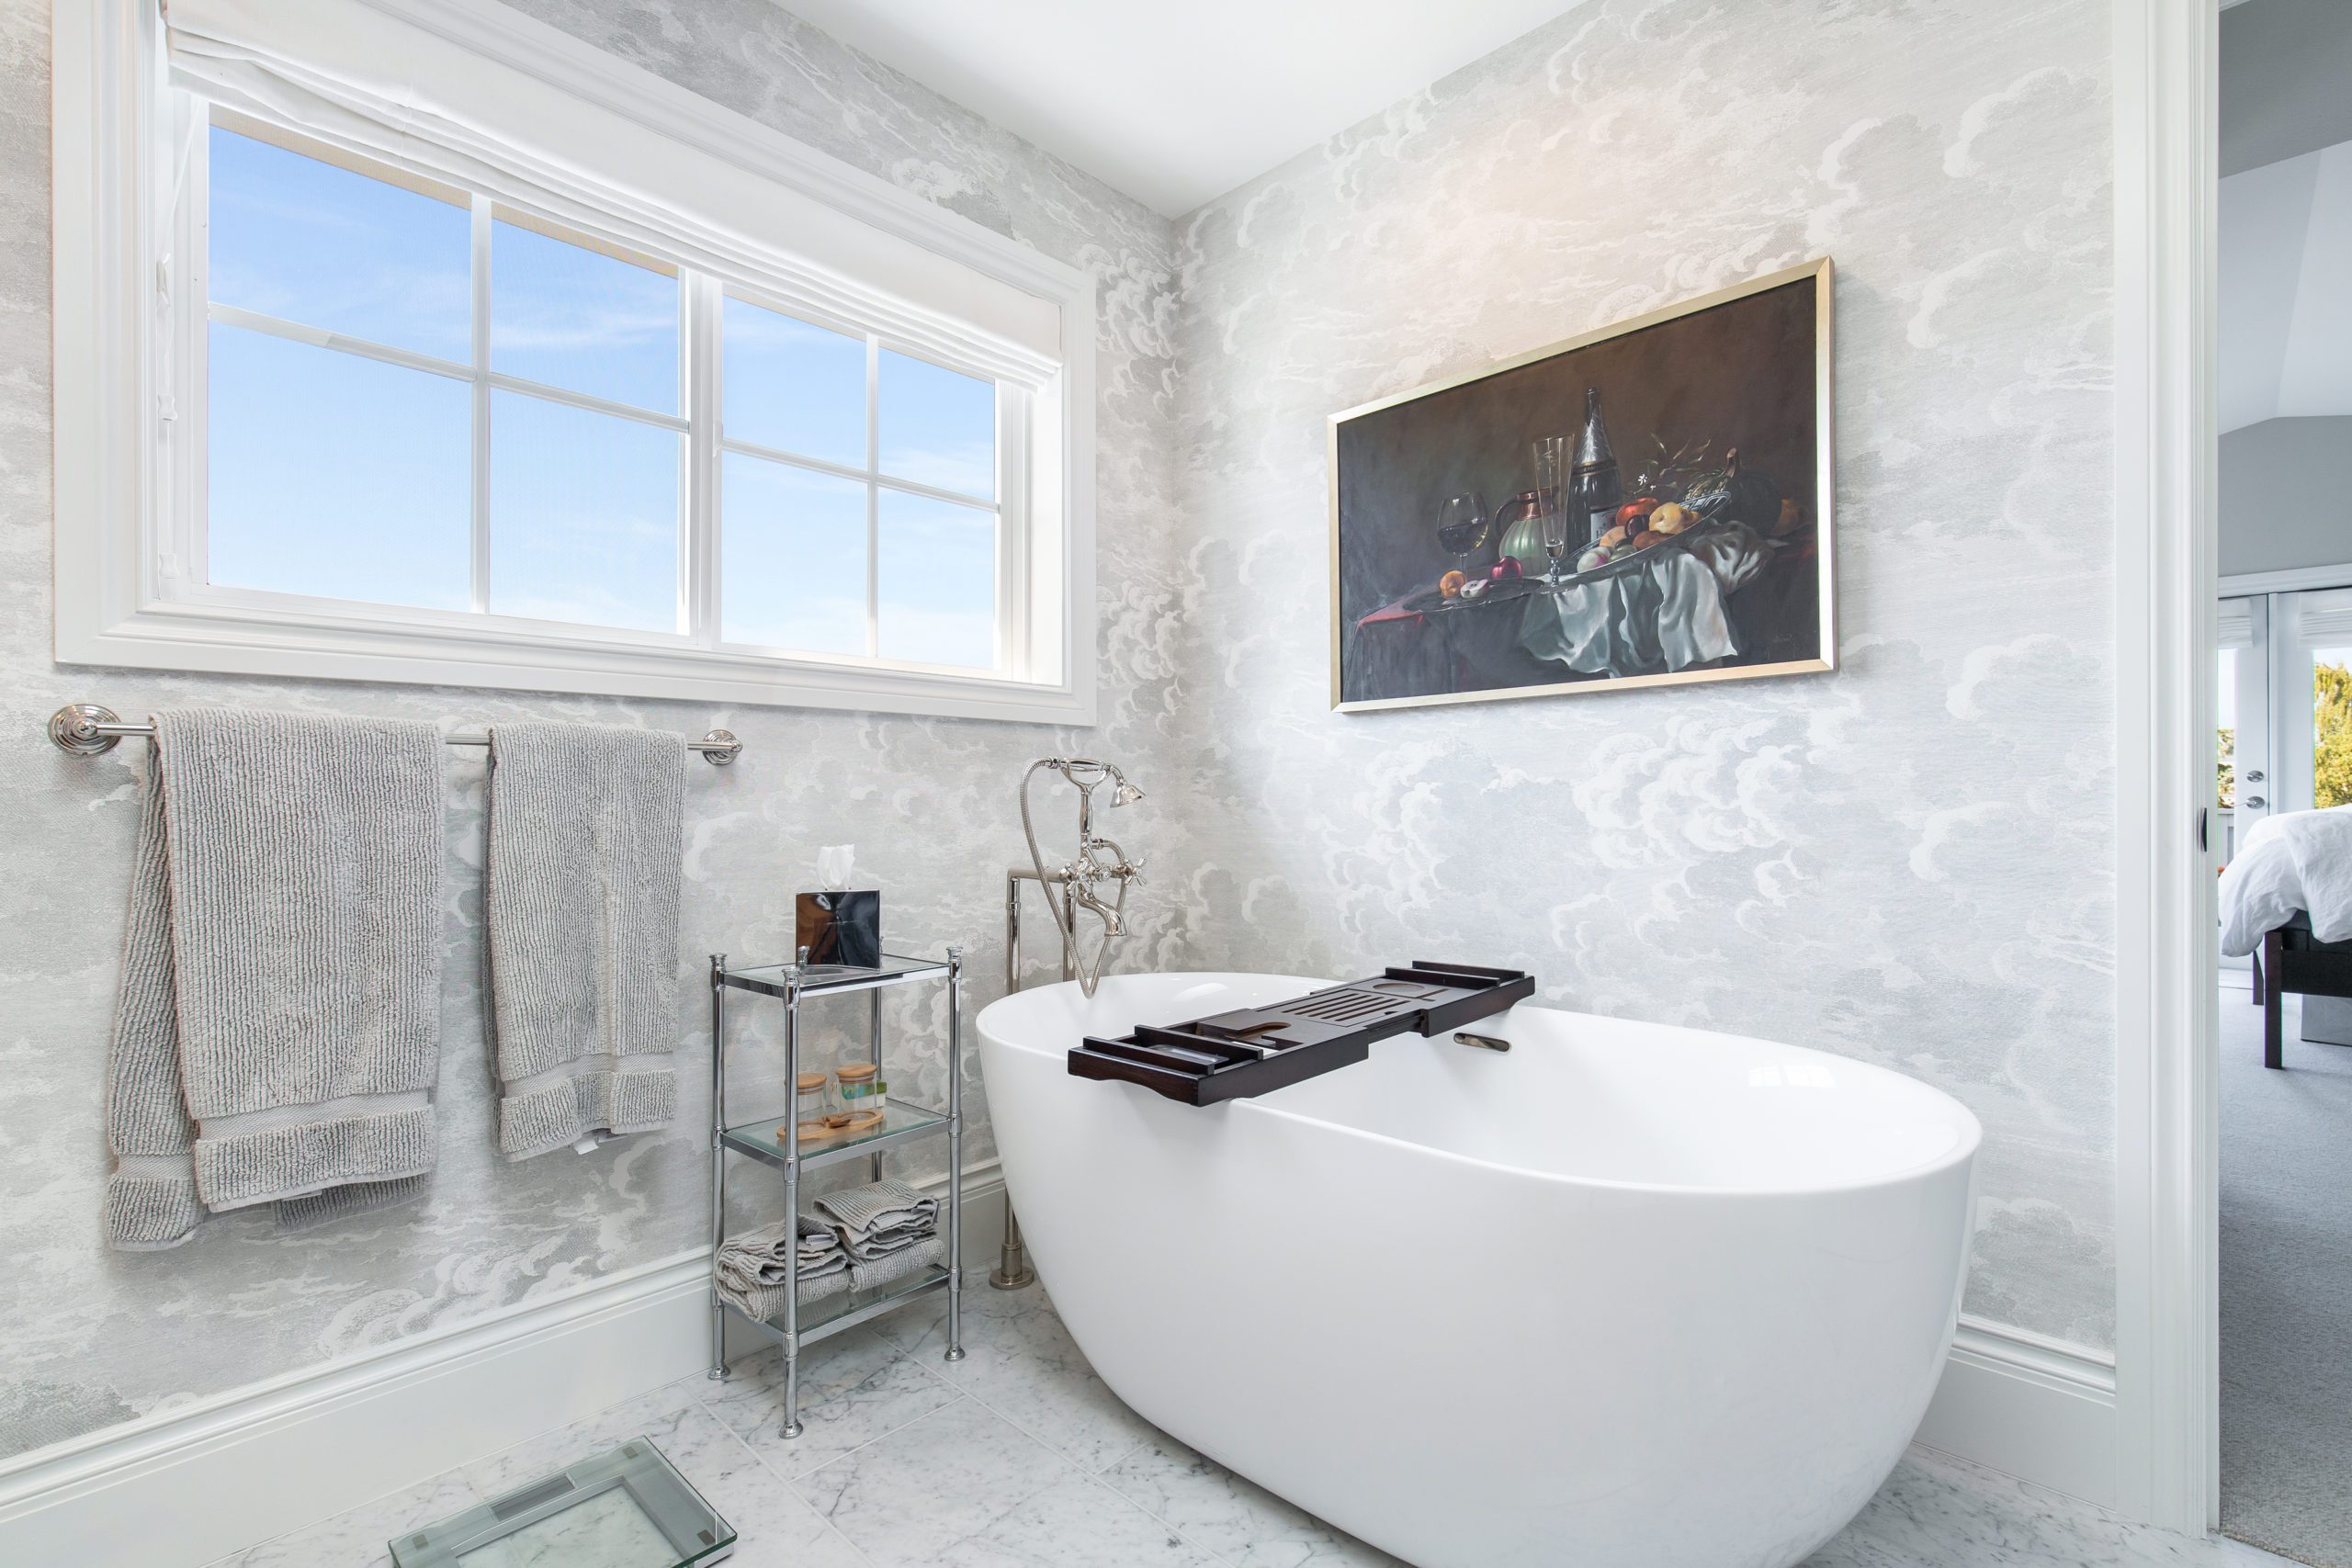 Freestanding white tub with a wall painting and white bathroom wallpaper